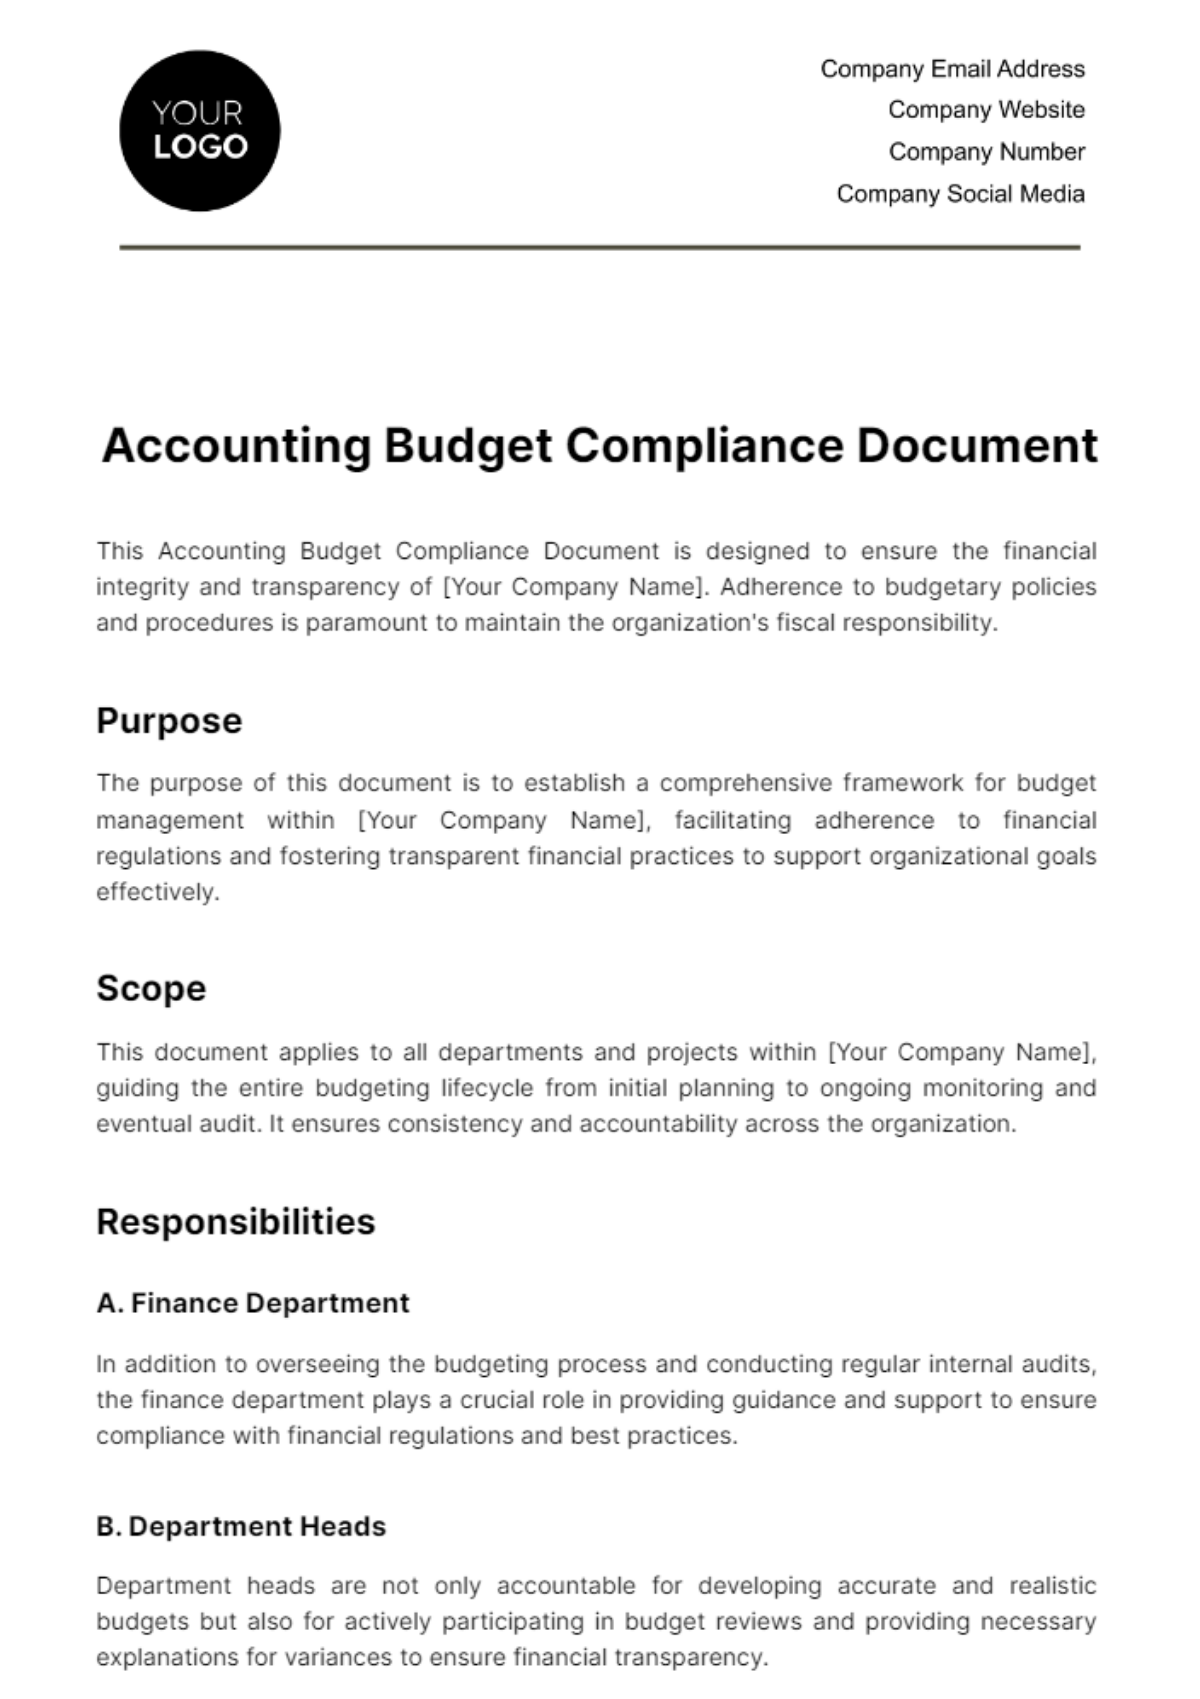 Accounting Budget Compliance Document Template